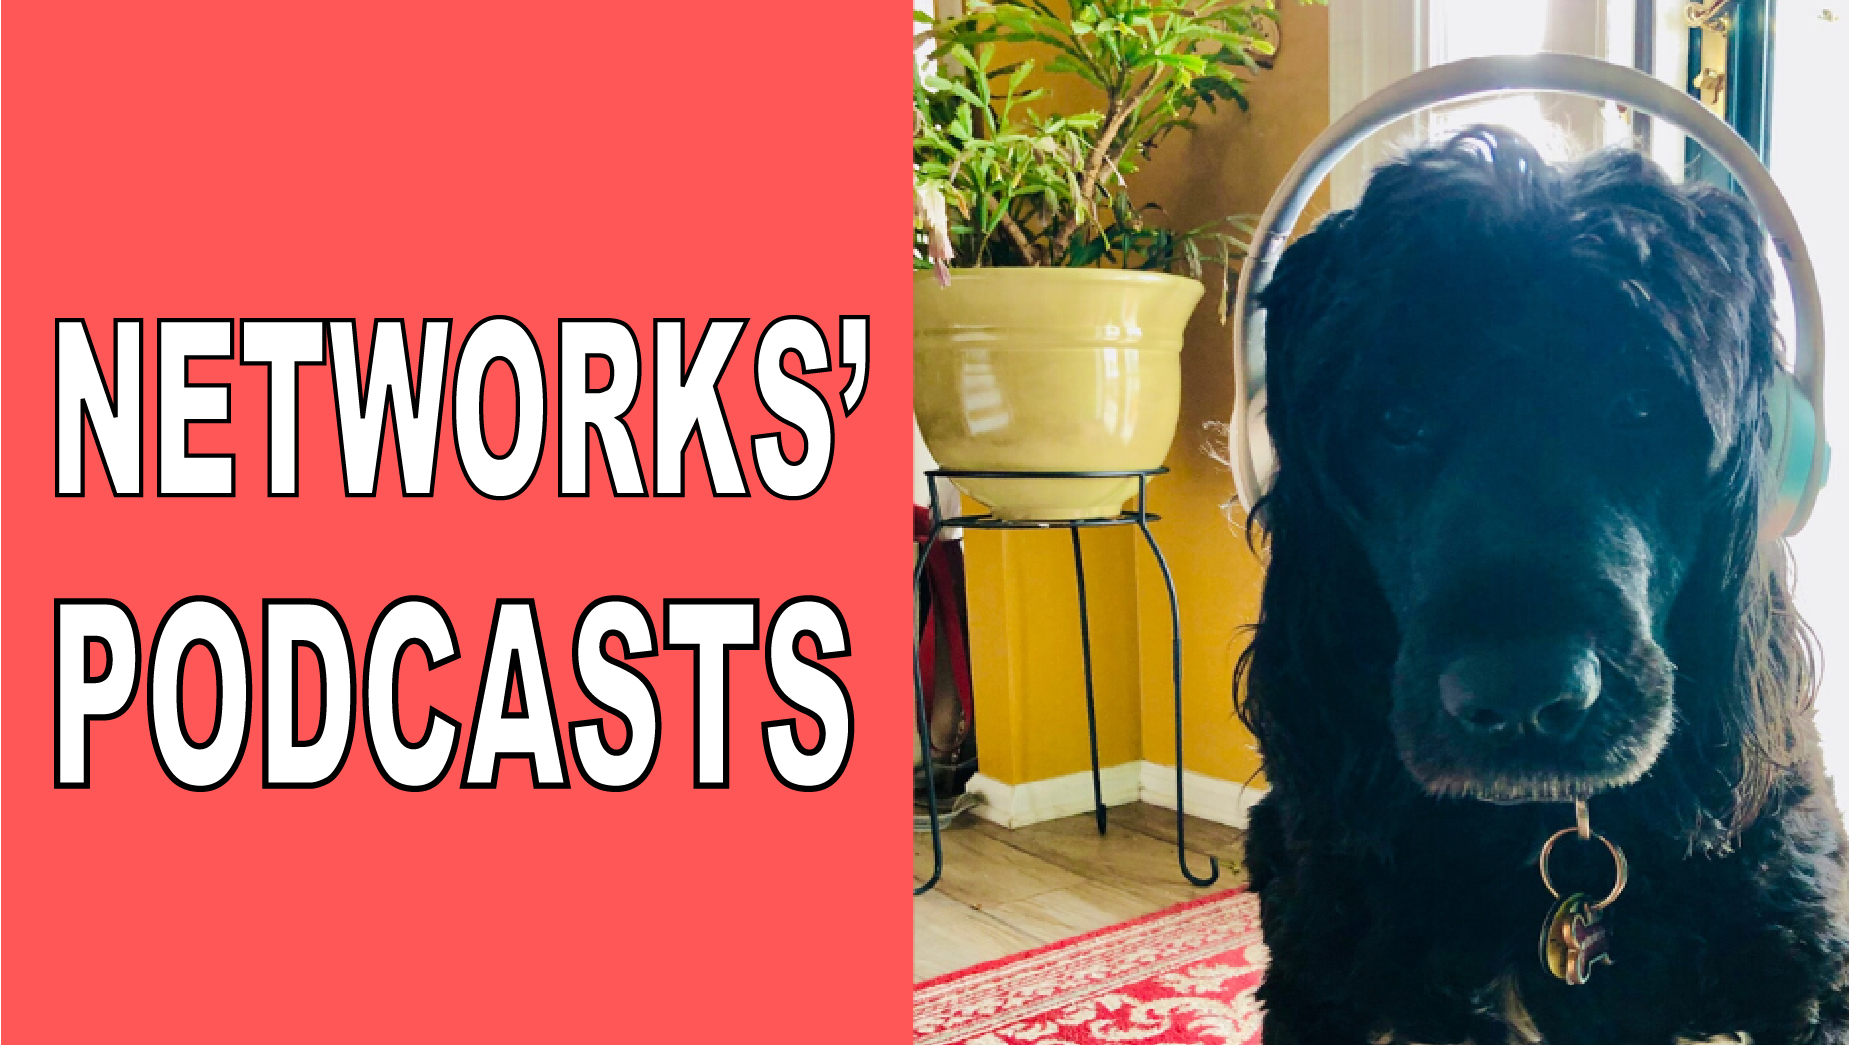 Networks Podcasts - image of dog wearing headphones